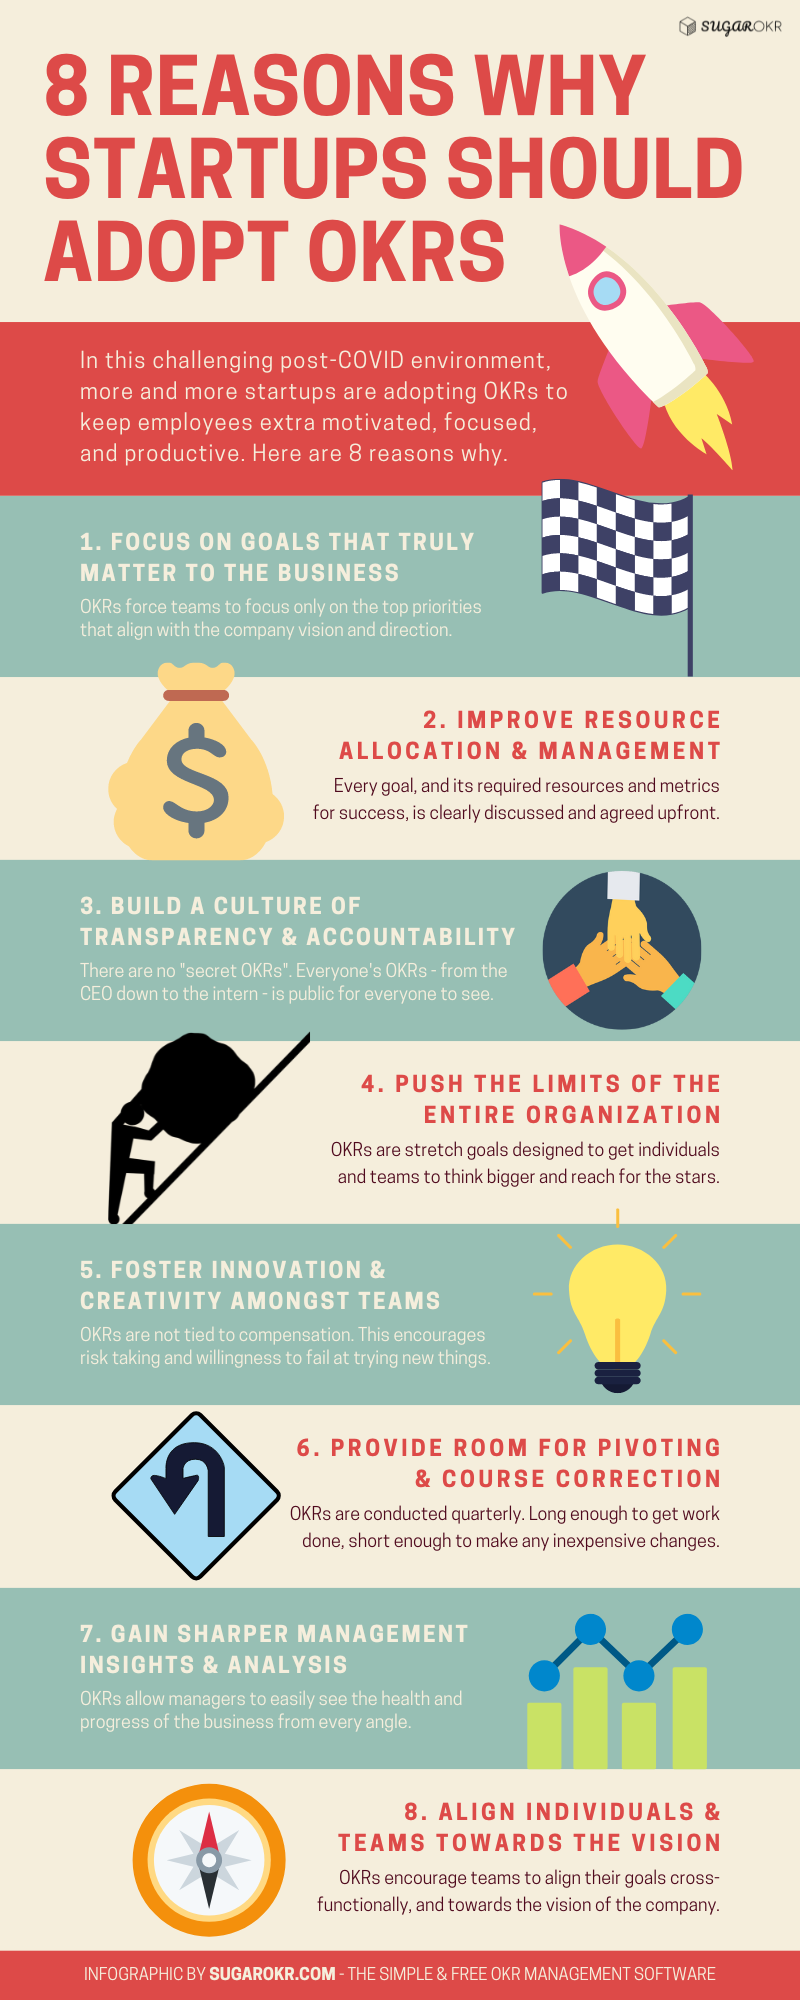 Infographic - 8 reasons why startups should adopt OKRs in this post-covid world